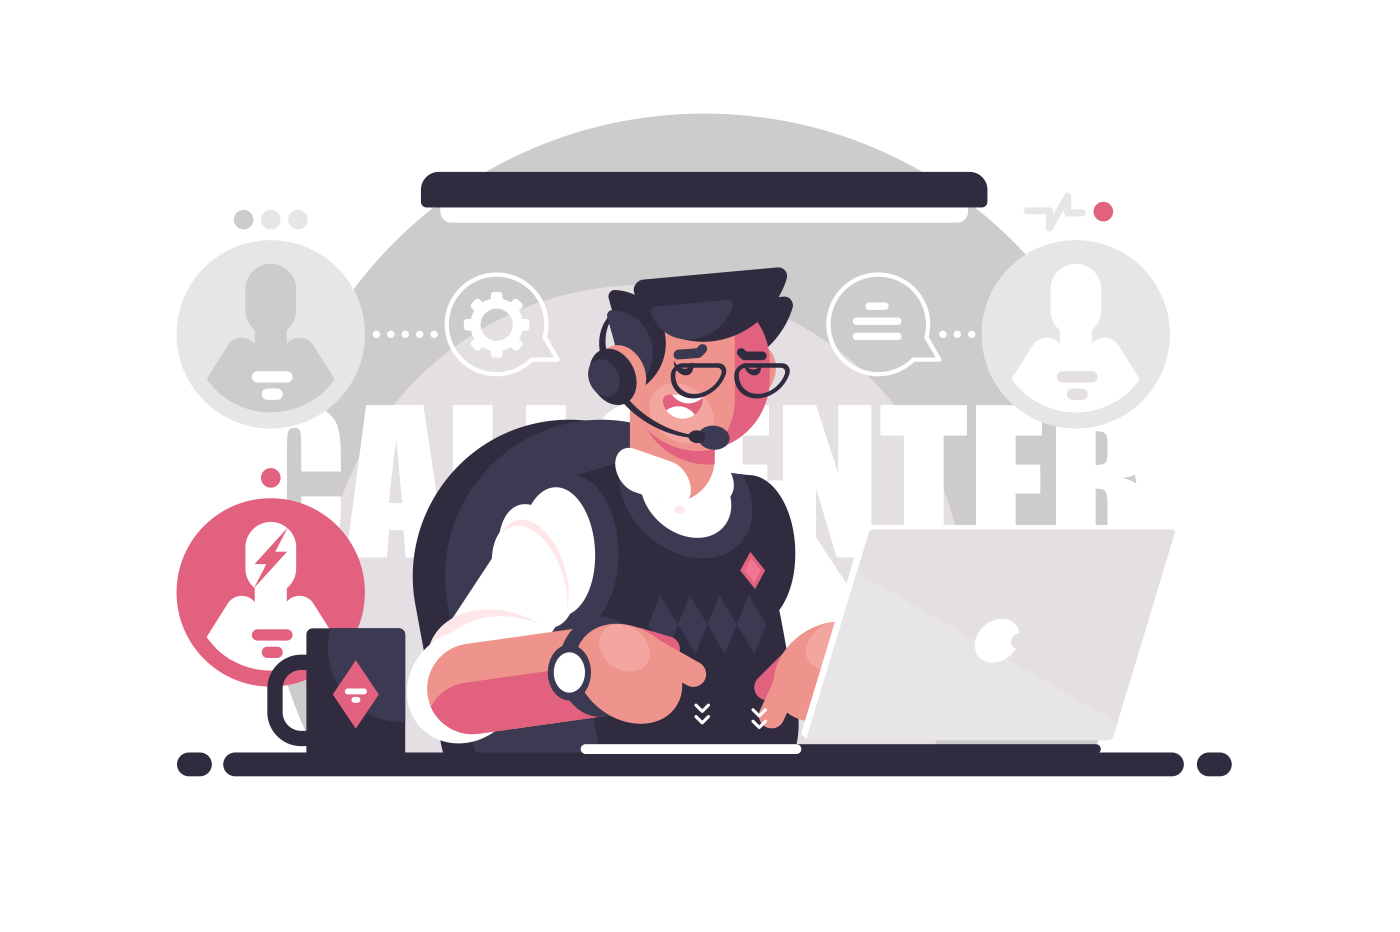 Call center employee in the workplace. Concept young man works and helps people. Vector illustration.